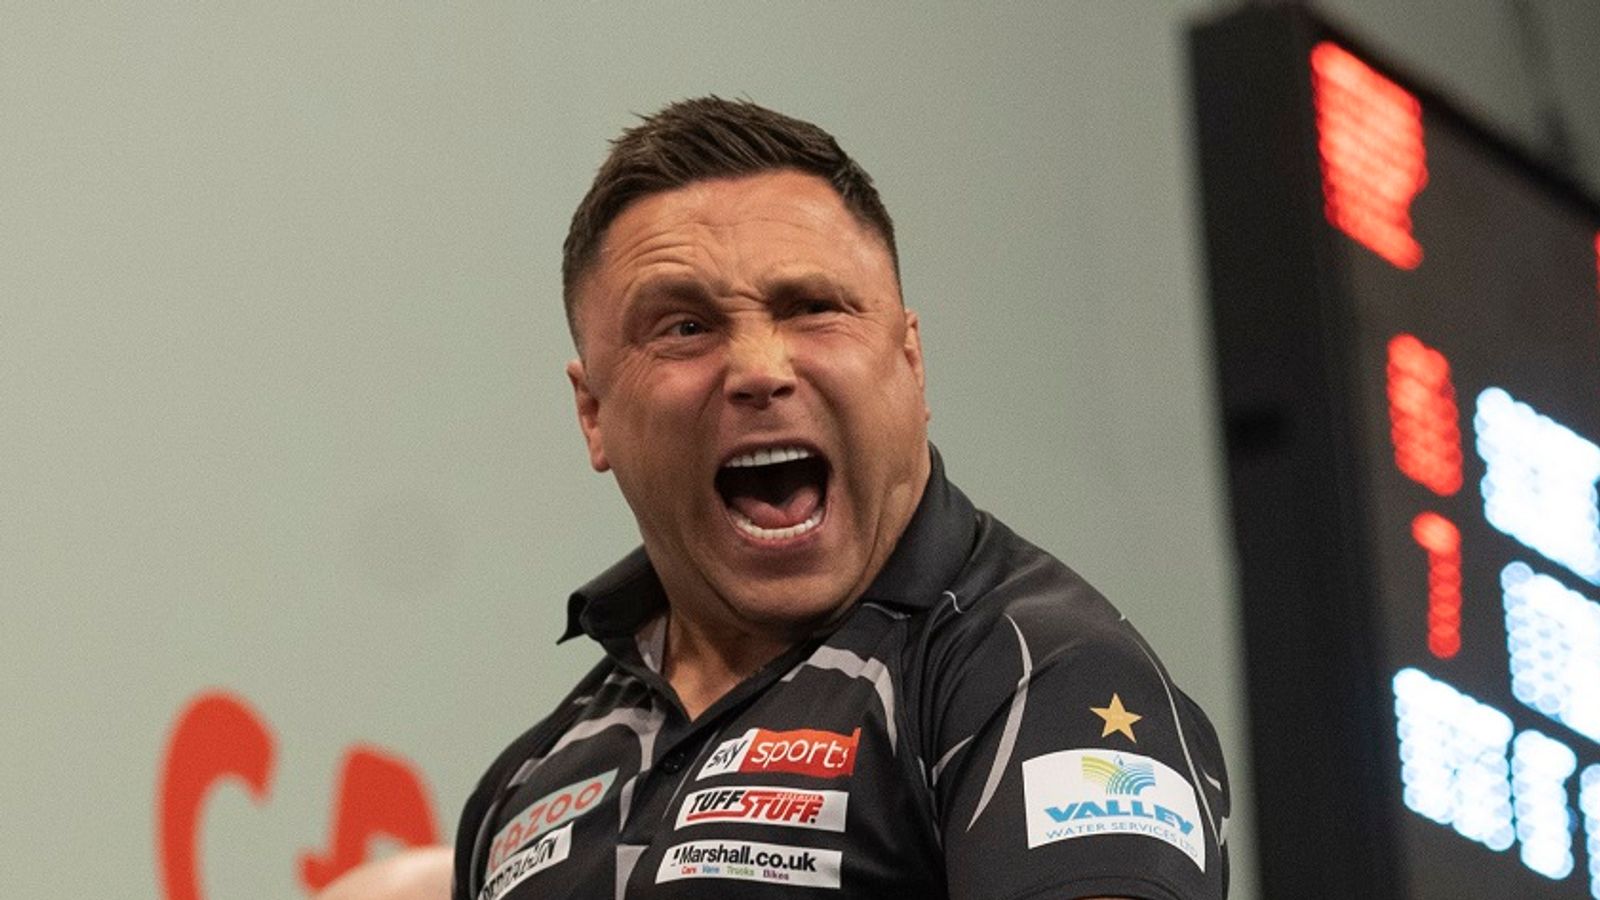 Gerwyn Price, James Wade, Peter Wright and Michael Smith left to battle it out for Grand Slam glory